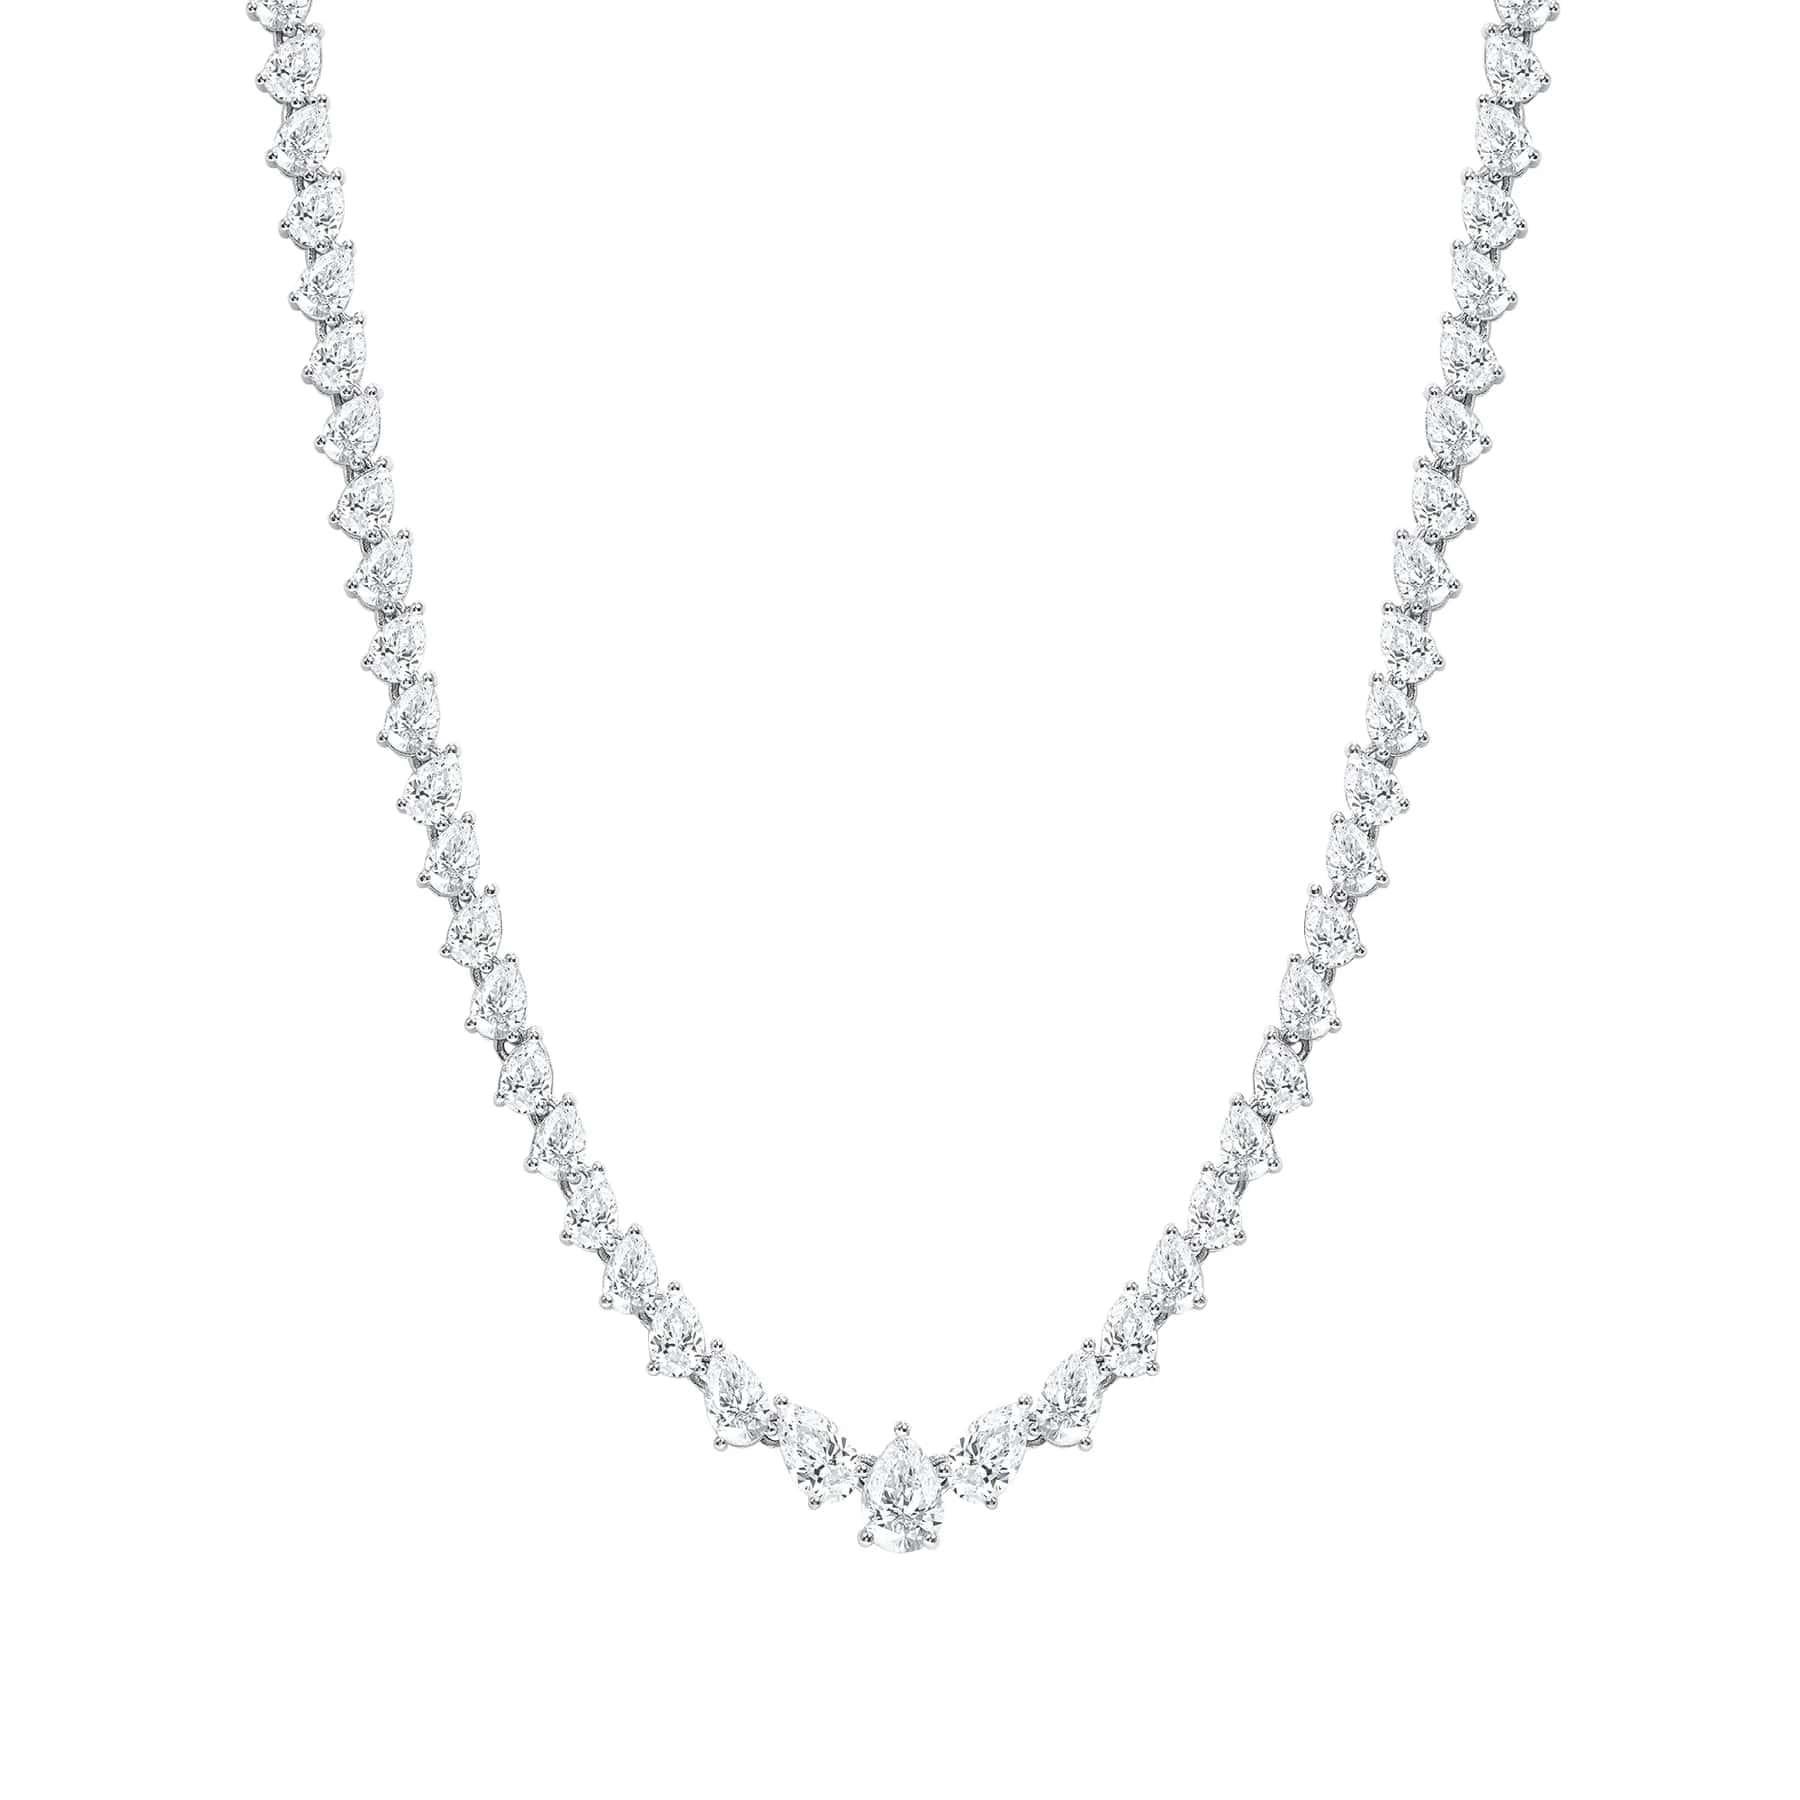 This diamond tennis necklace features beautifully cut pear diamonds set gorgeously in 18k gold

Necklace Information 
Metal : 18k Gold
Diamond Cut : Round Natural Conflict Free Diamond 
Total Diamond Carats:  17cts center stone 0.50 ct
Diamond